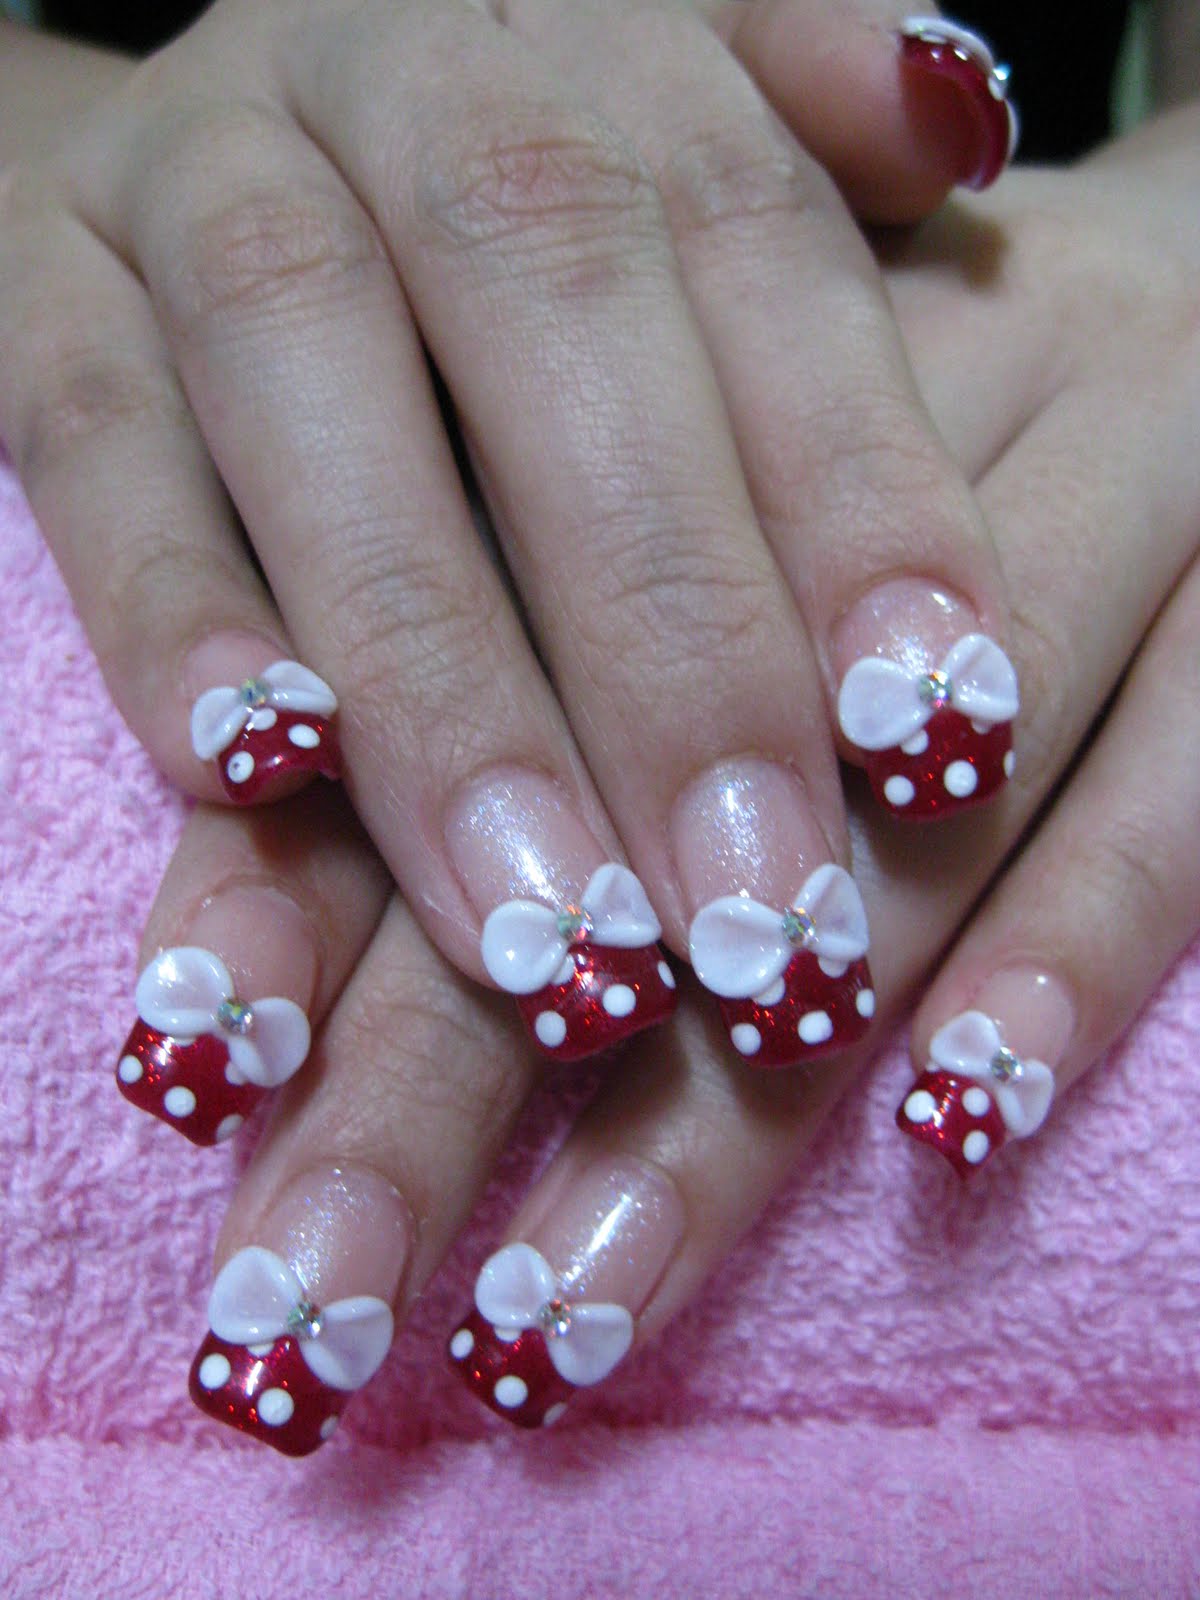 Nail Haven ♥: Gelish Minnie Mouse!